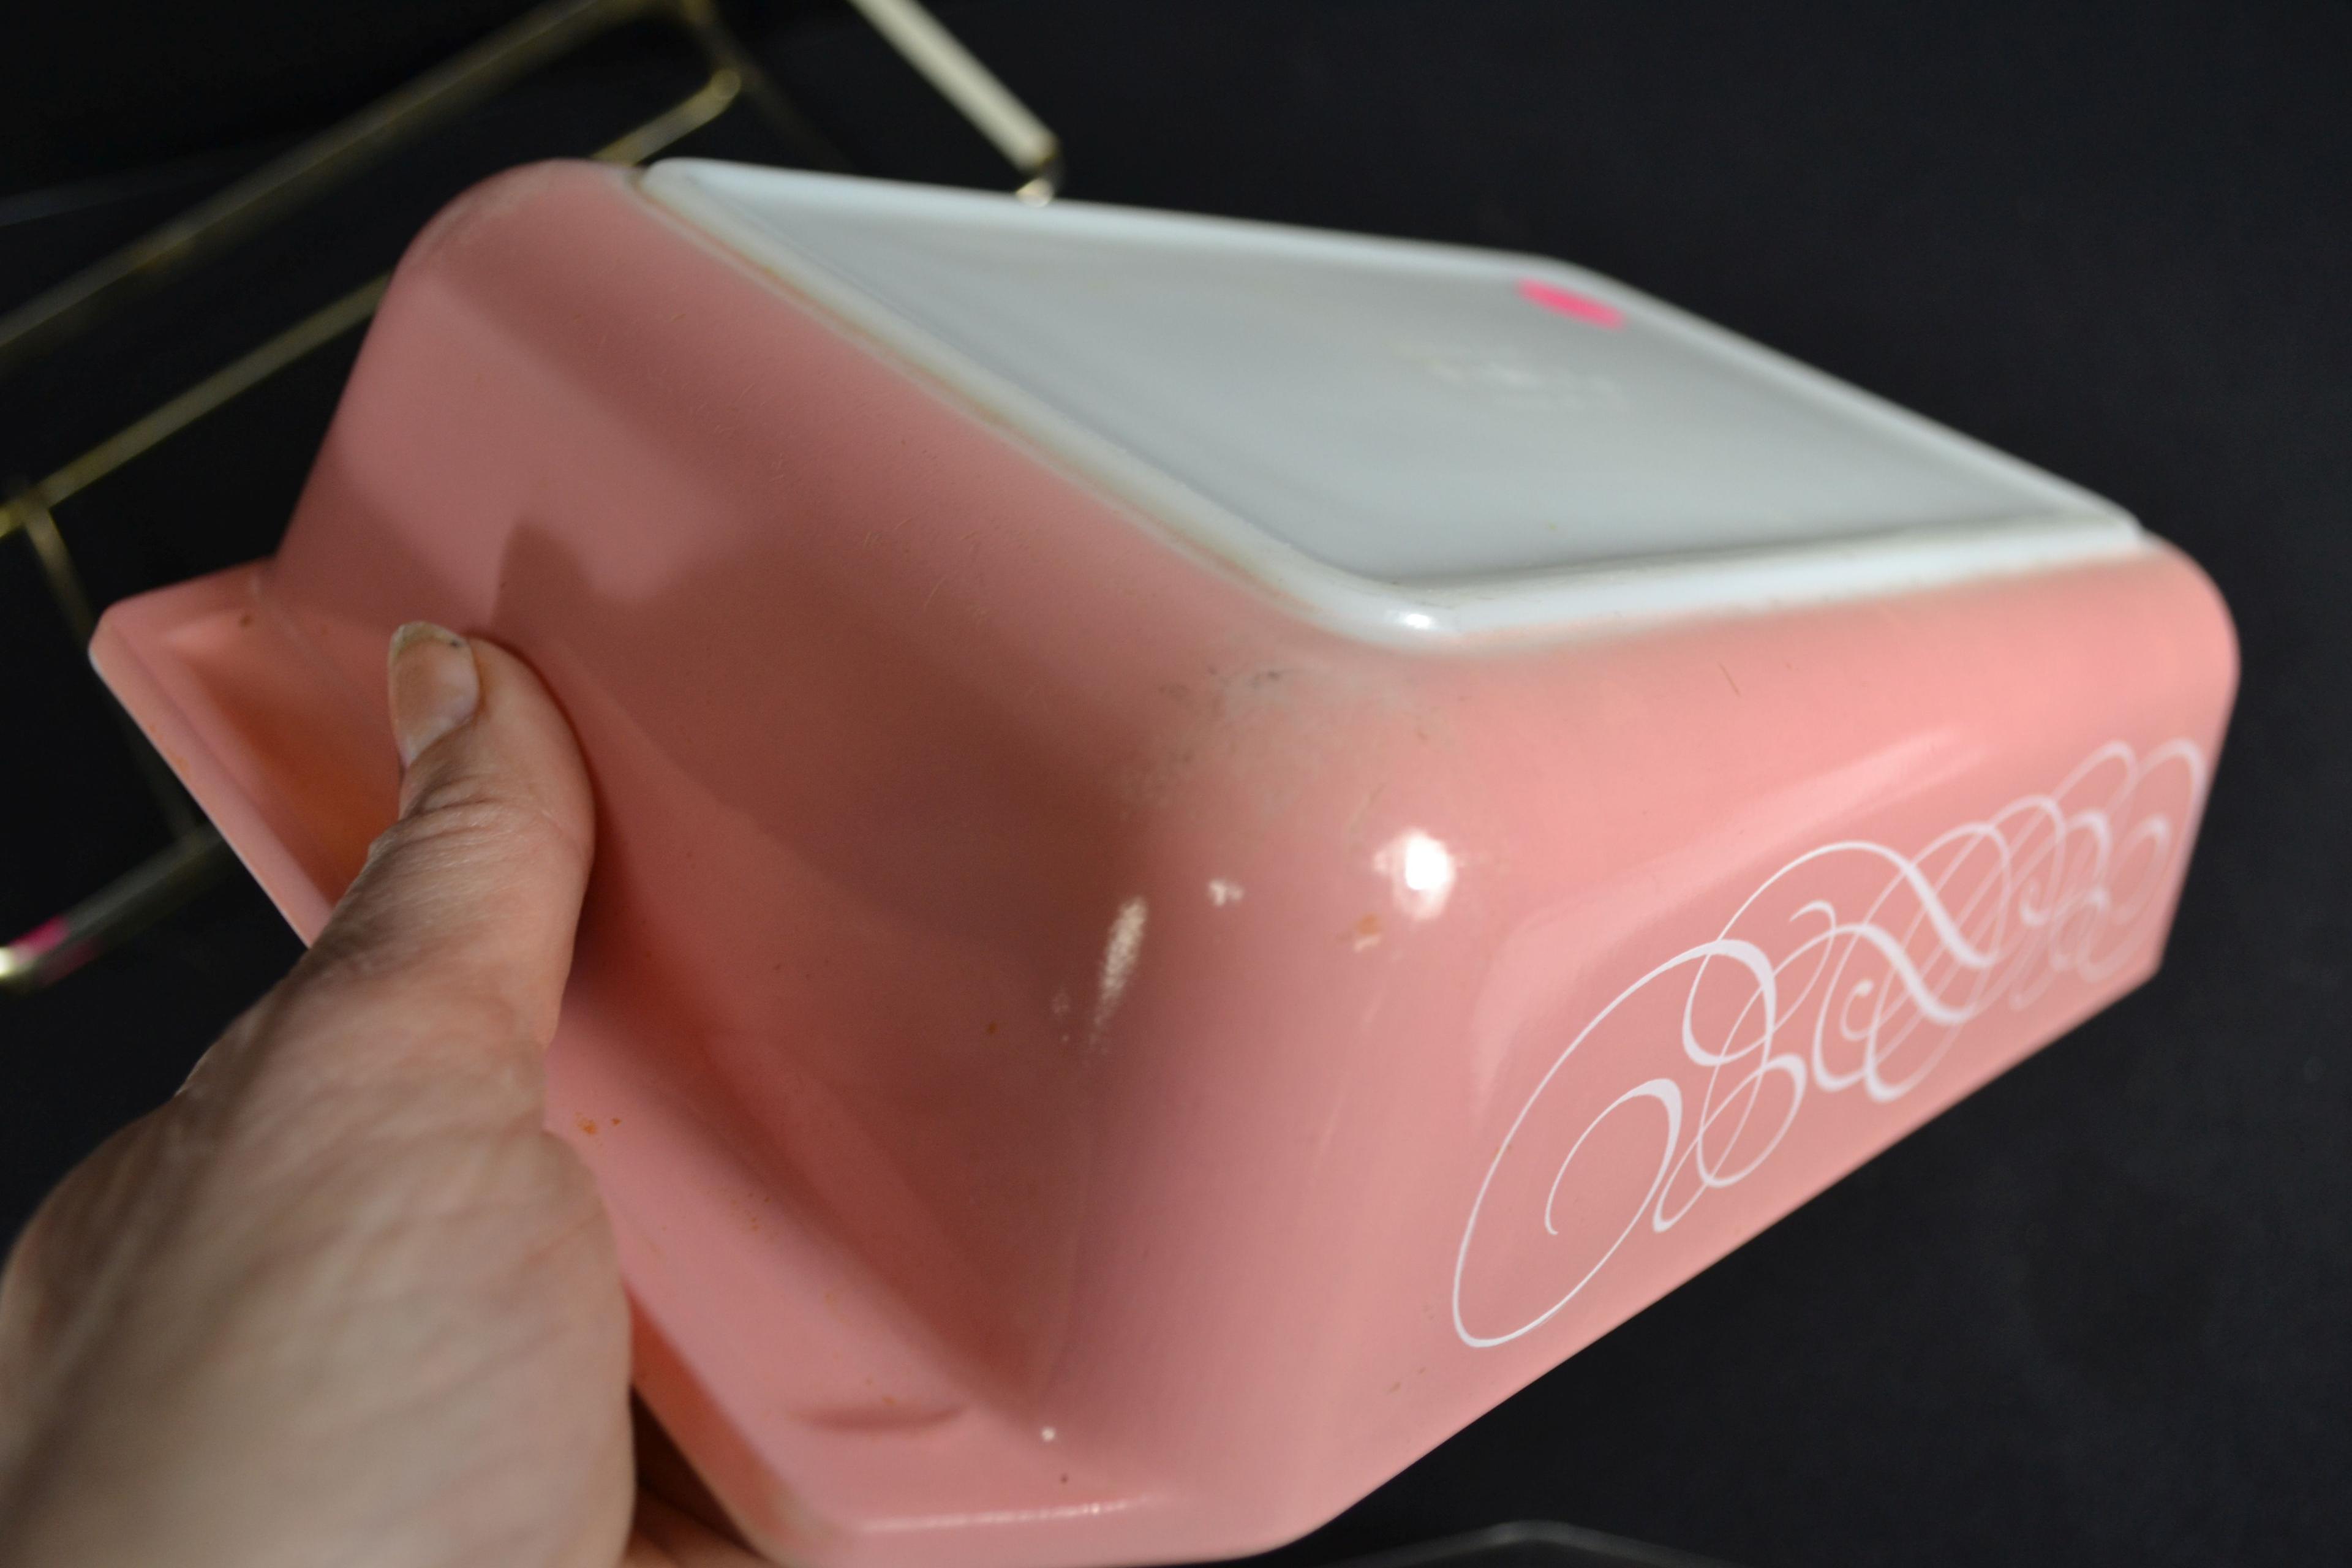 Pyrex Pink Scroll No. 575 Space Saver w/Lid and Cradle; Mfg. 1958-1959; Chip on lid.